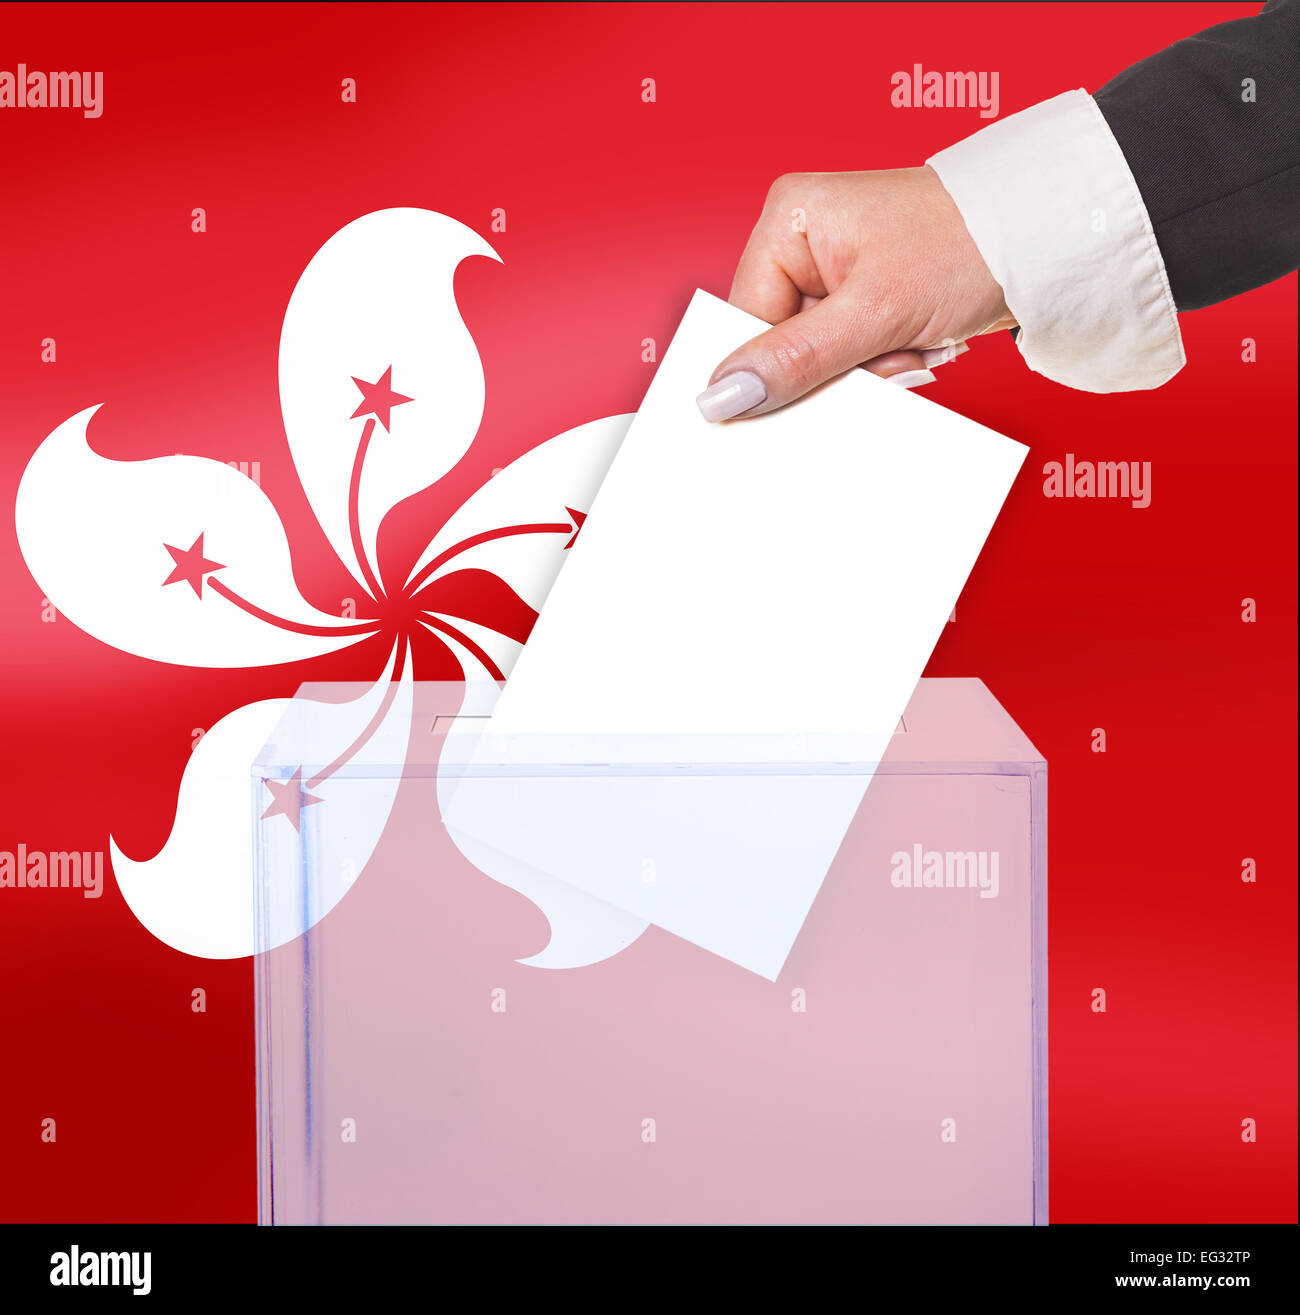 electoral vote by ballot, under the Hong Kong flag Stock Photo